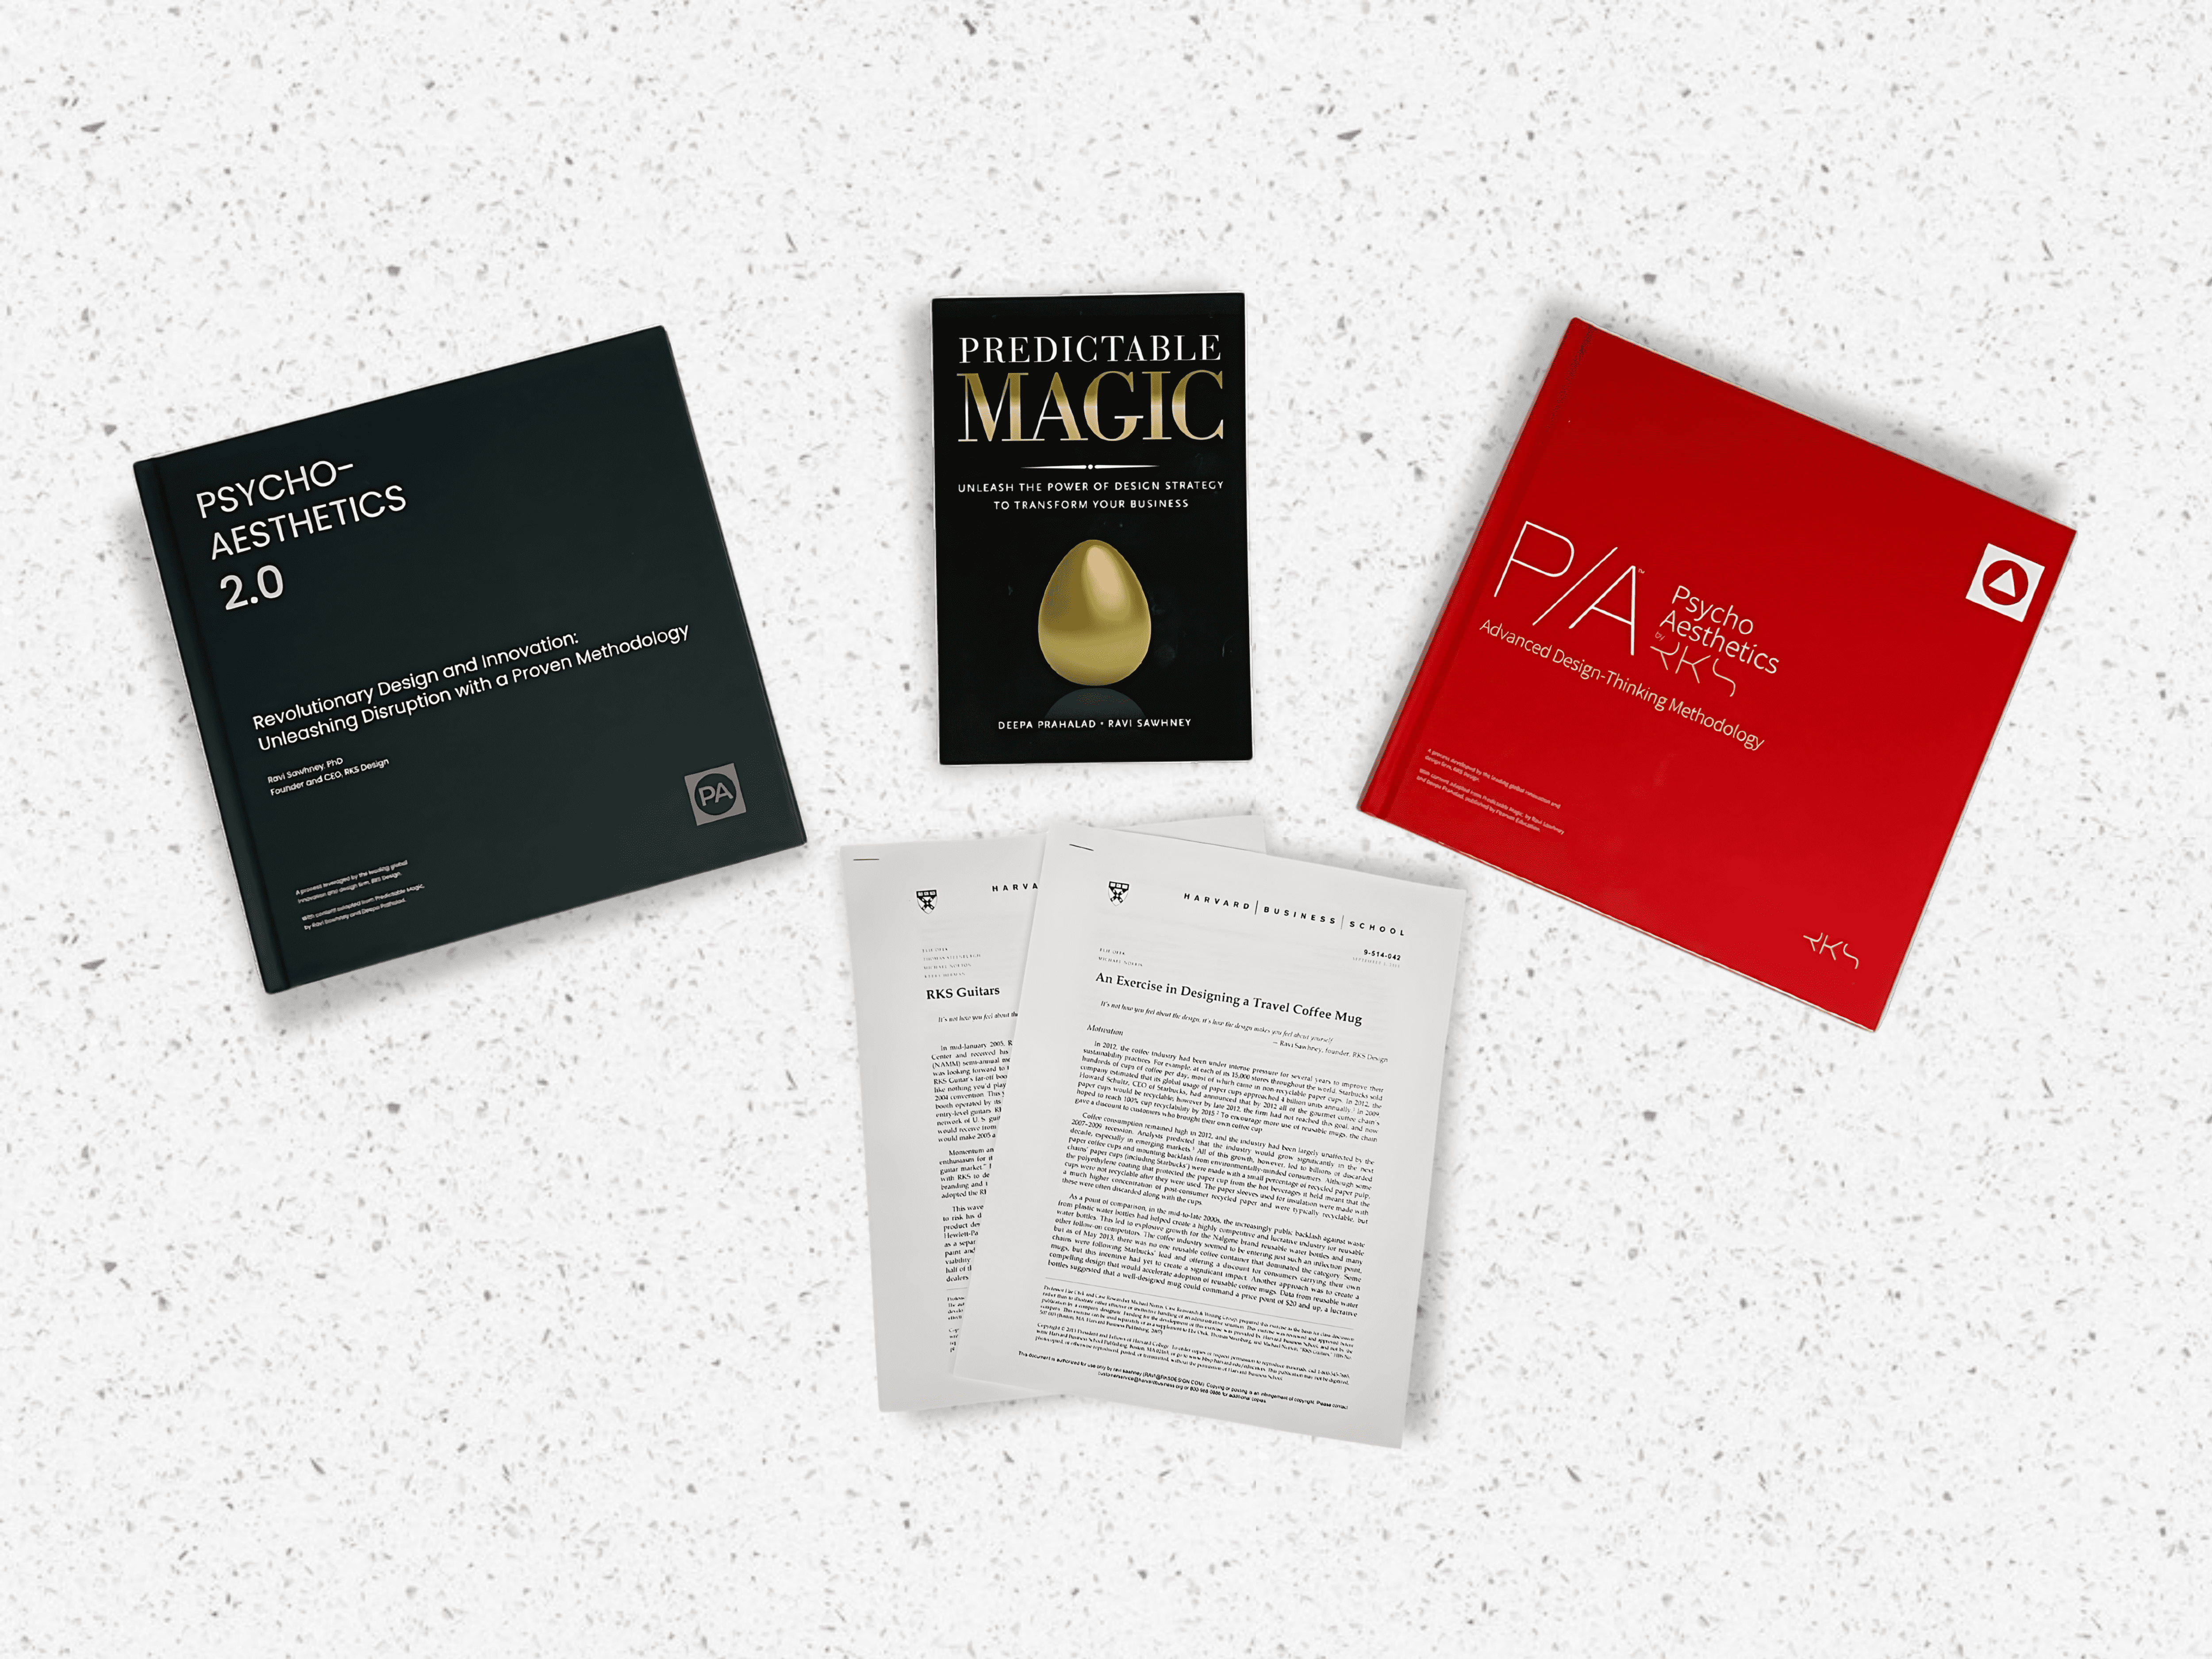 A collection of design and innovation books and documents on a white speckled surface. The items include "Psycho-Aesthetics 2.0" with a black cover, "Predictable Magic" with a black cover and a golden egg on it, "Psycho Aesthetics" with a red cover, and two documents with text, including one titled "An Exercise in Designing a Travel Coffee Mug